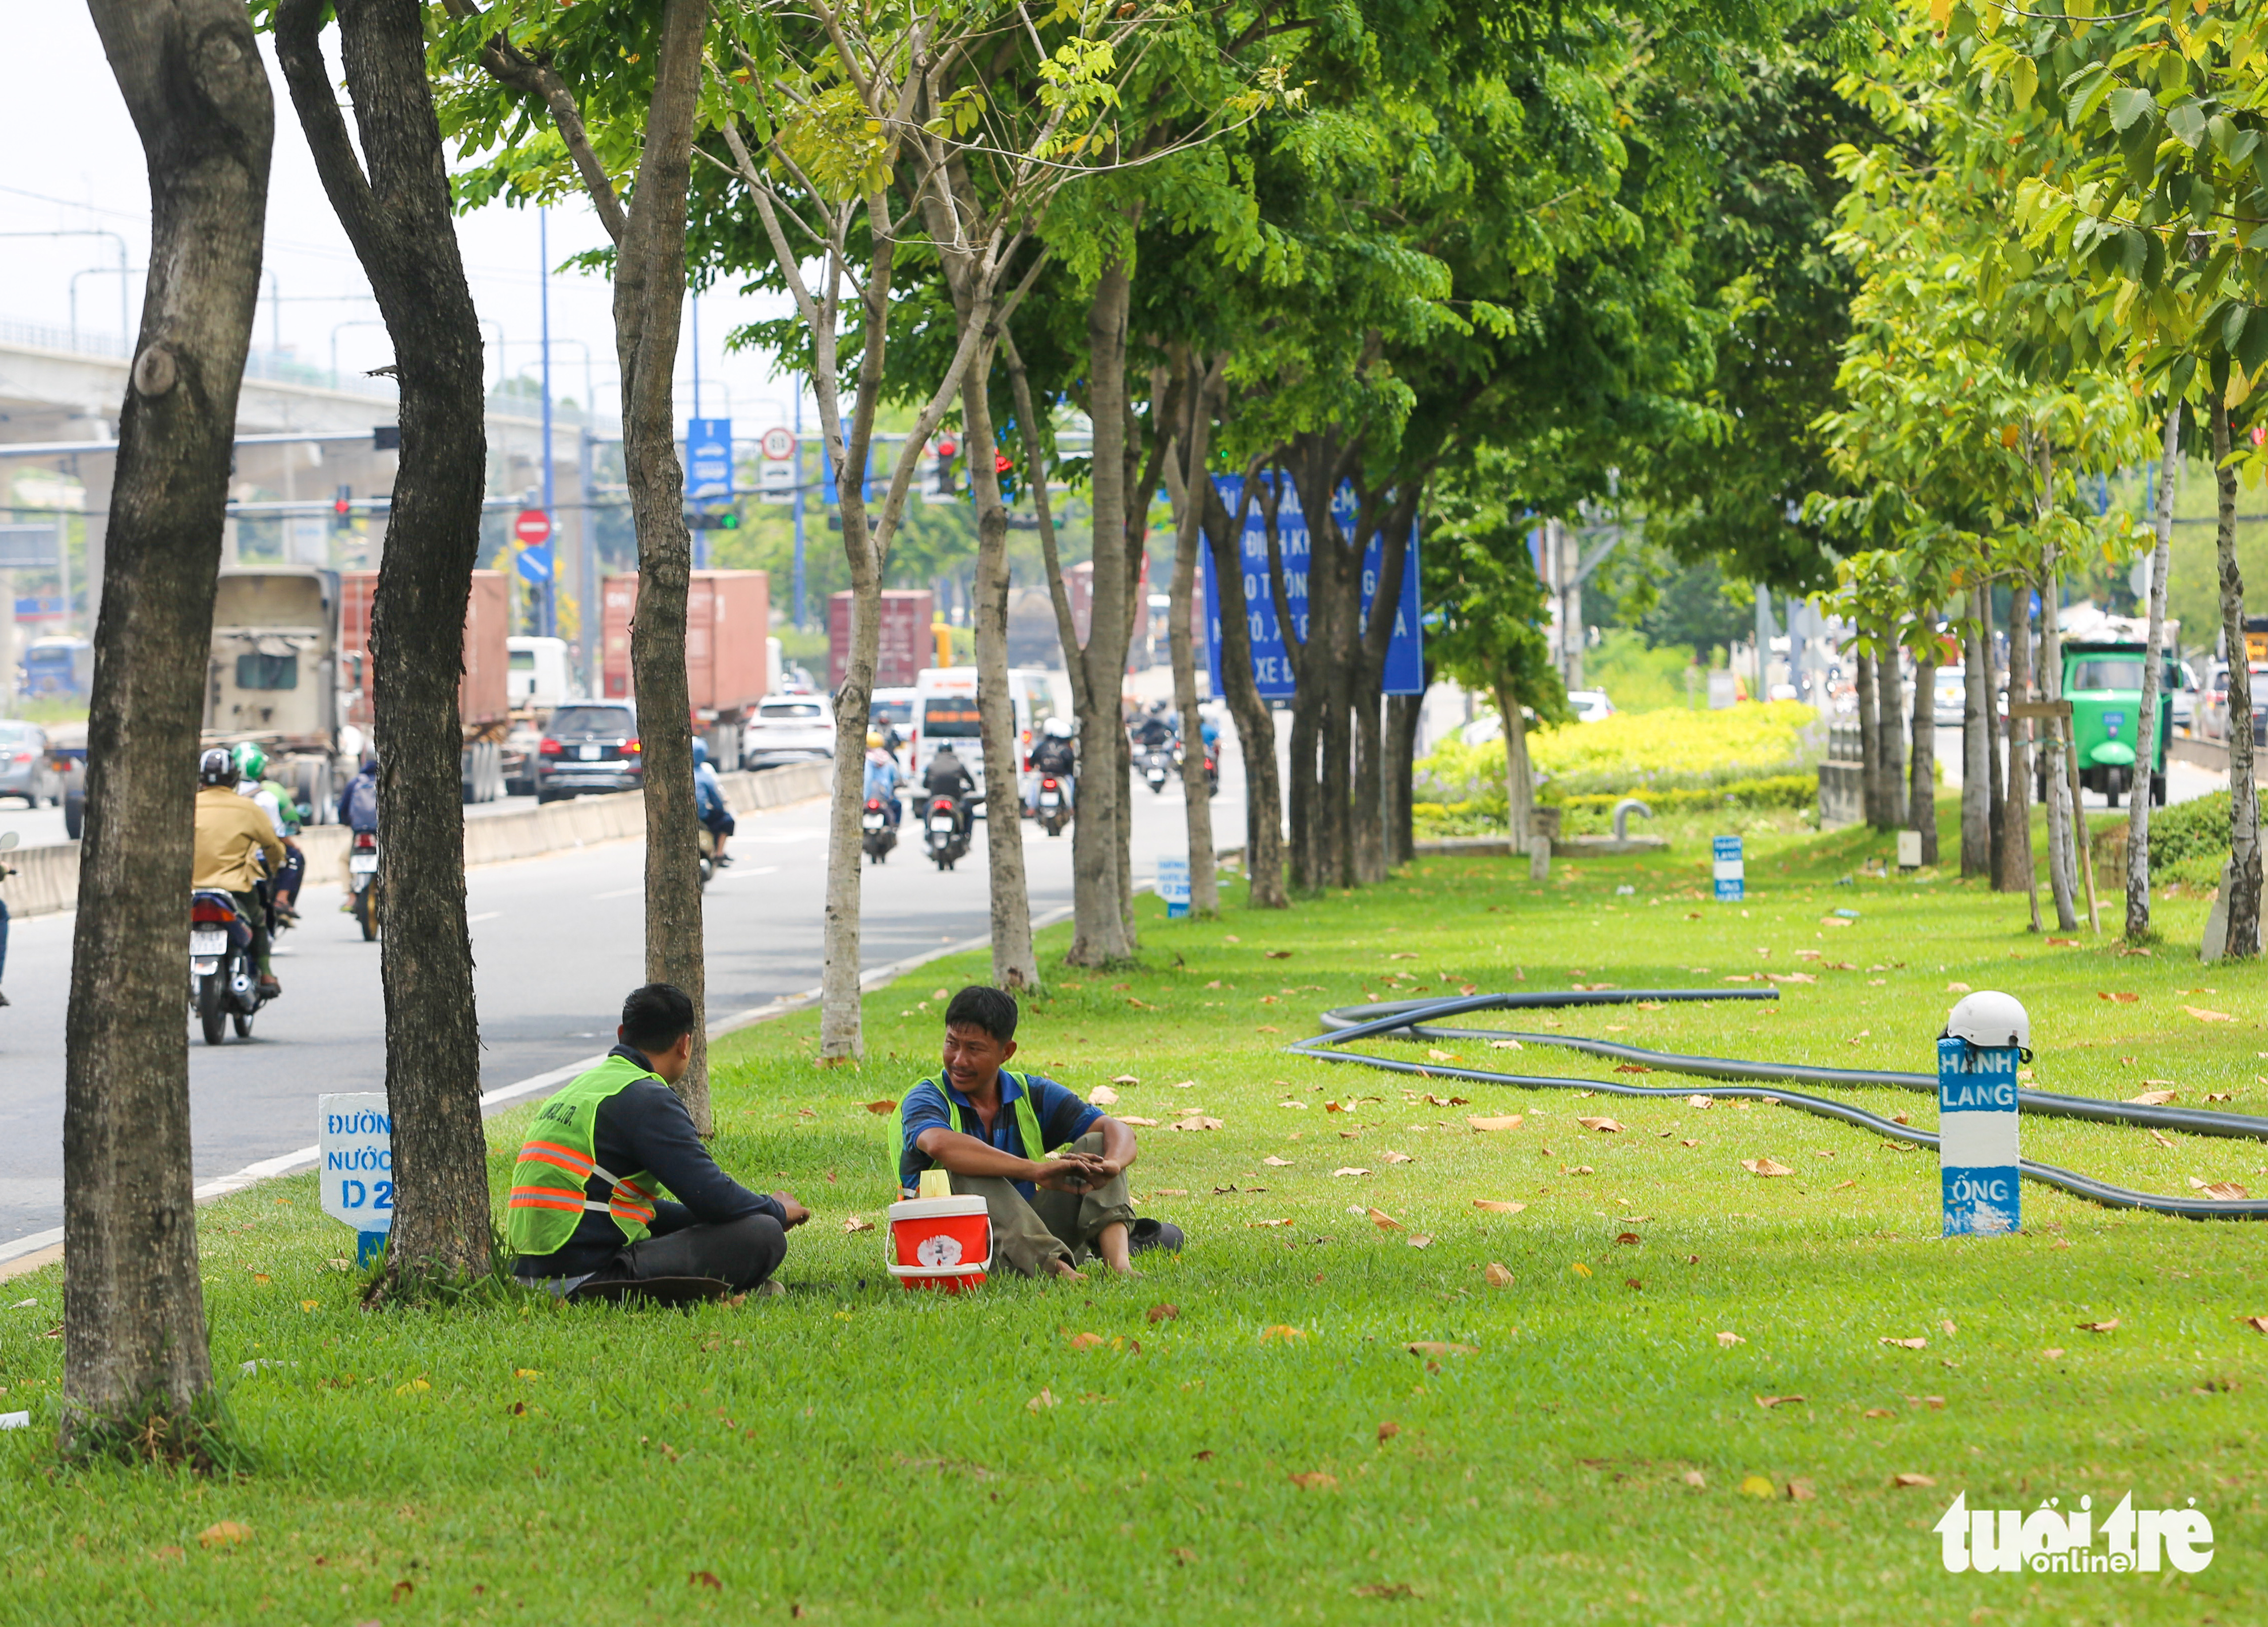 Workers take a break along a sidewalk in Ho Chi Minh City, April 24, 2022. Photo: Le Phan / Tuoi Tre